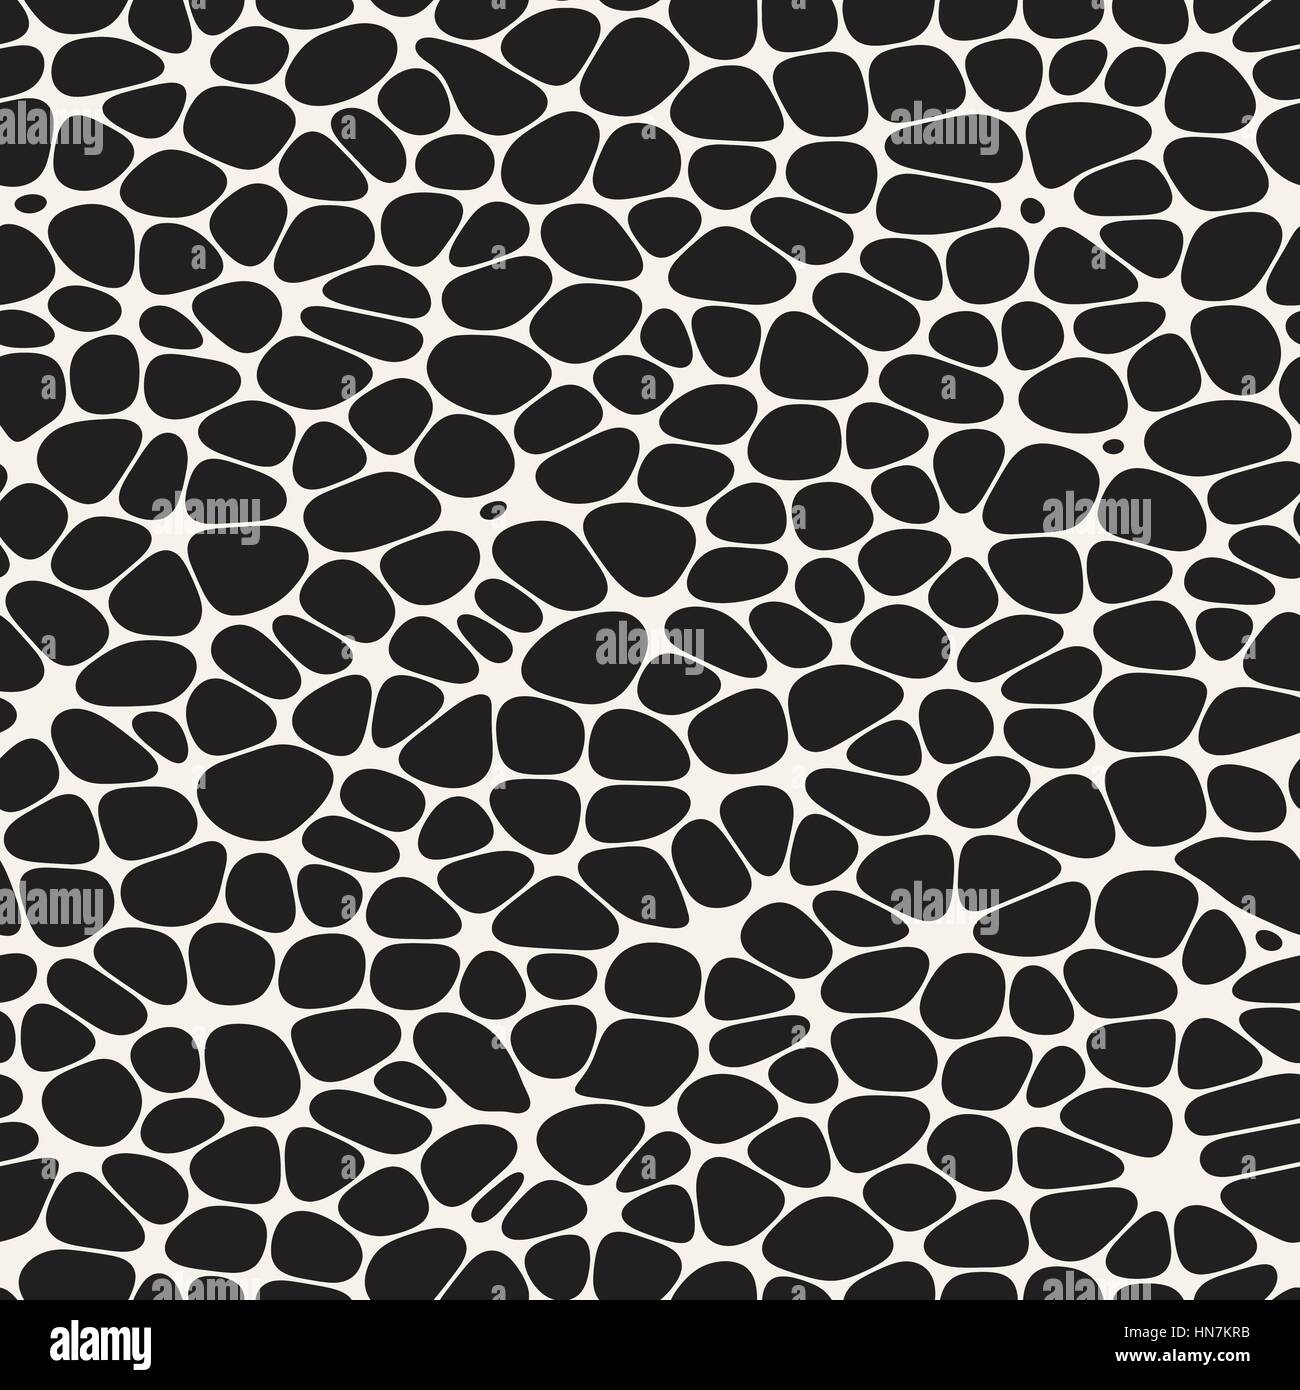 Abstract grayscale seamless texture organic forms Vector Image